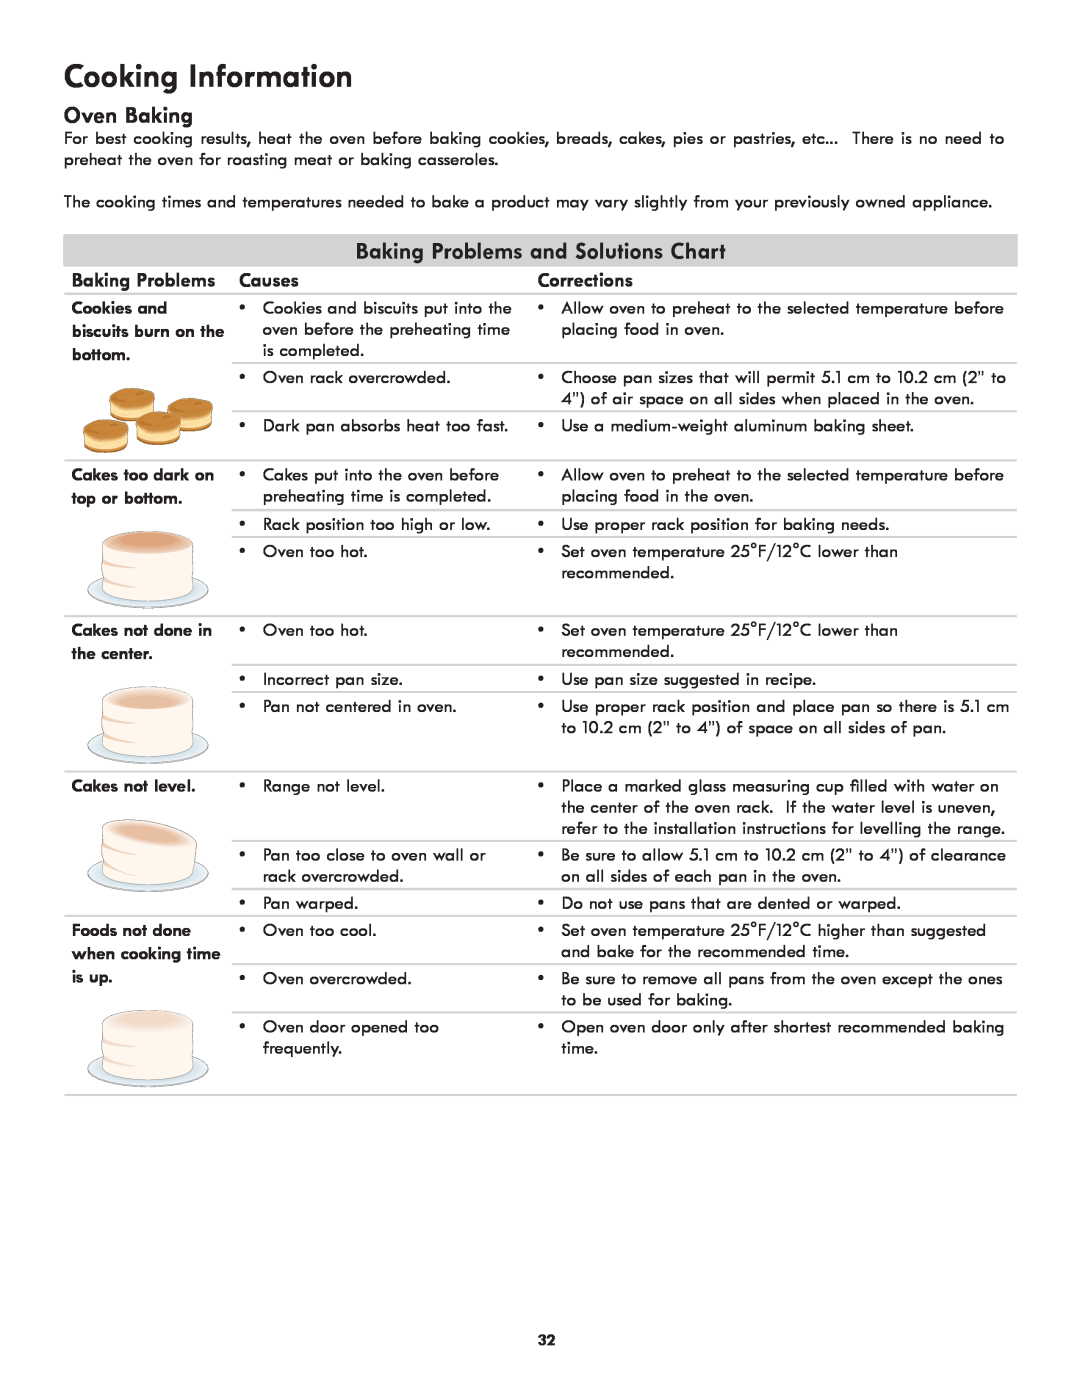 Kenmore Electric Range Cooking Information, Oven Baking, Baking Problems and Solutions Chart, Baking Problems Causes 